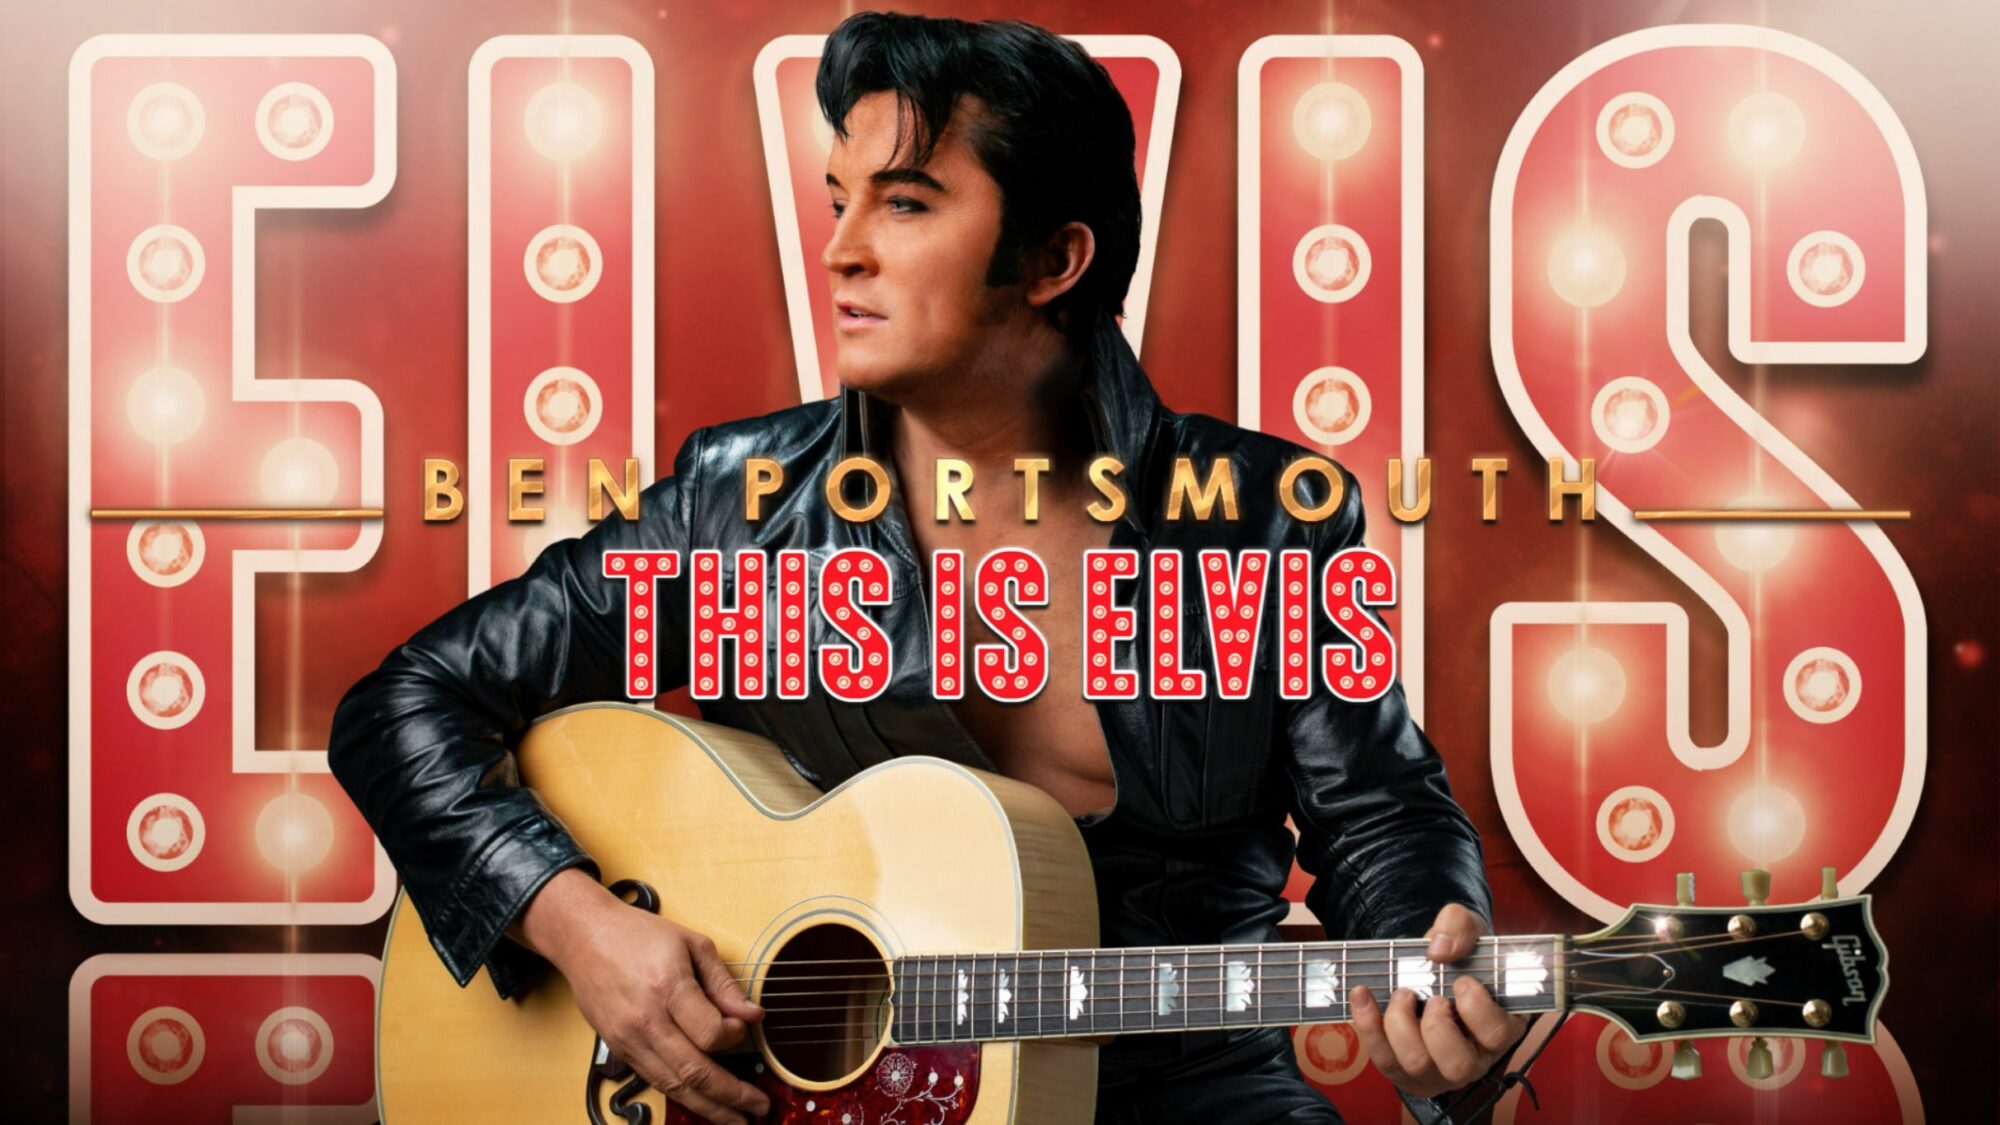 Image name Ben Portsmouth This Is Elvis at York Barbican York the 35 image from the post Ben Portsmouth - This Is Elvis at York Barbican, York in Yorkshire.com.